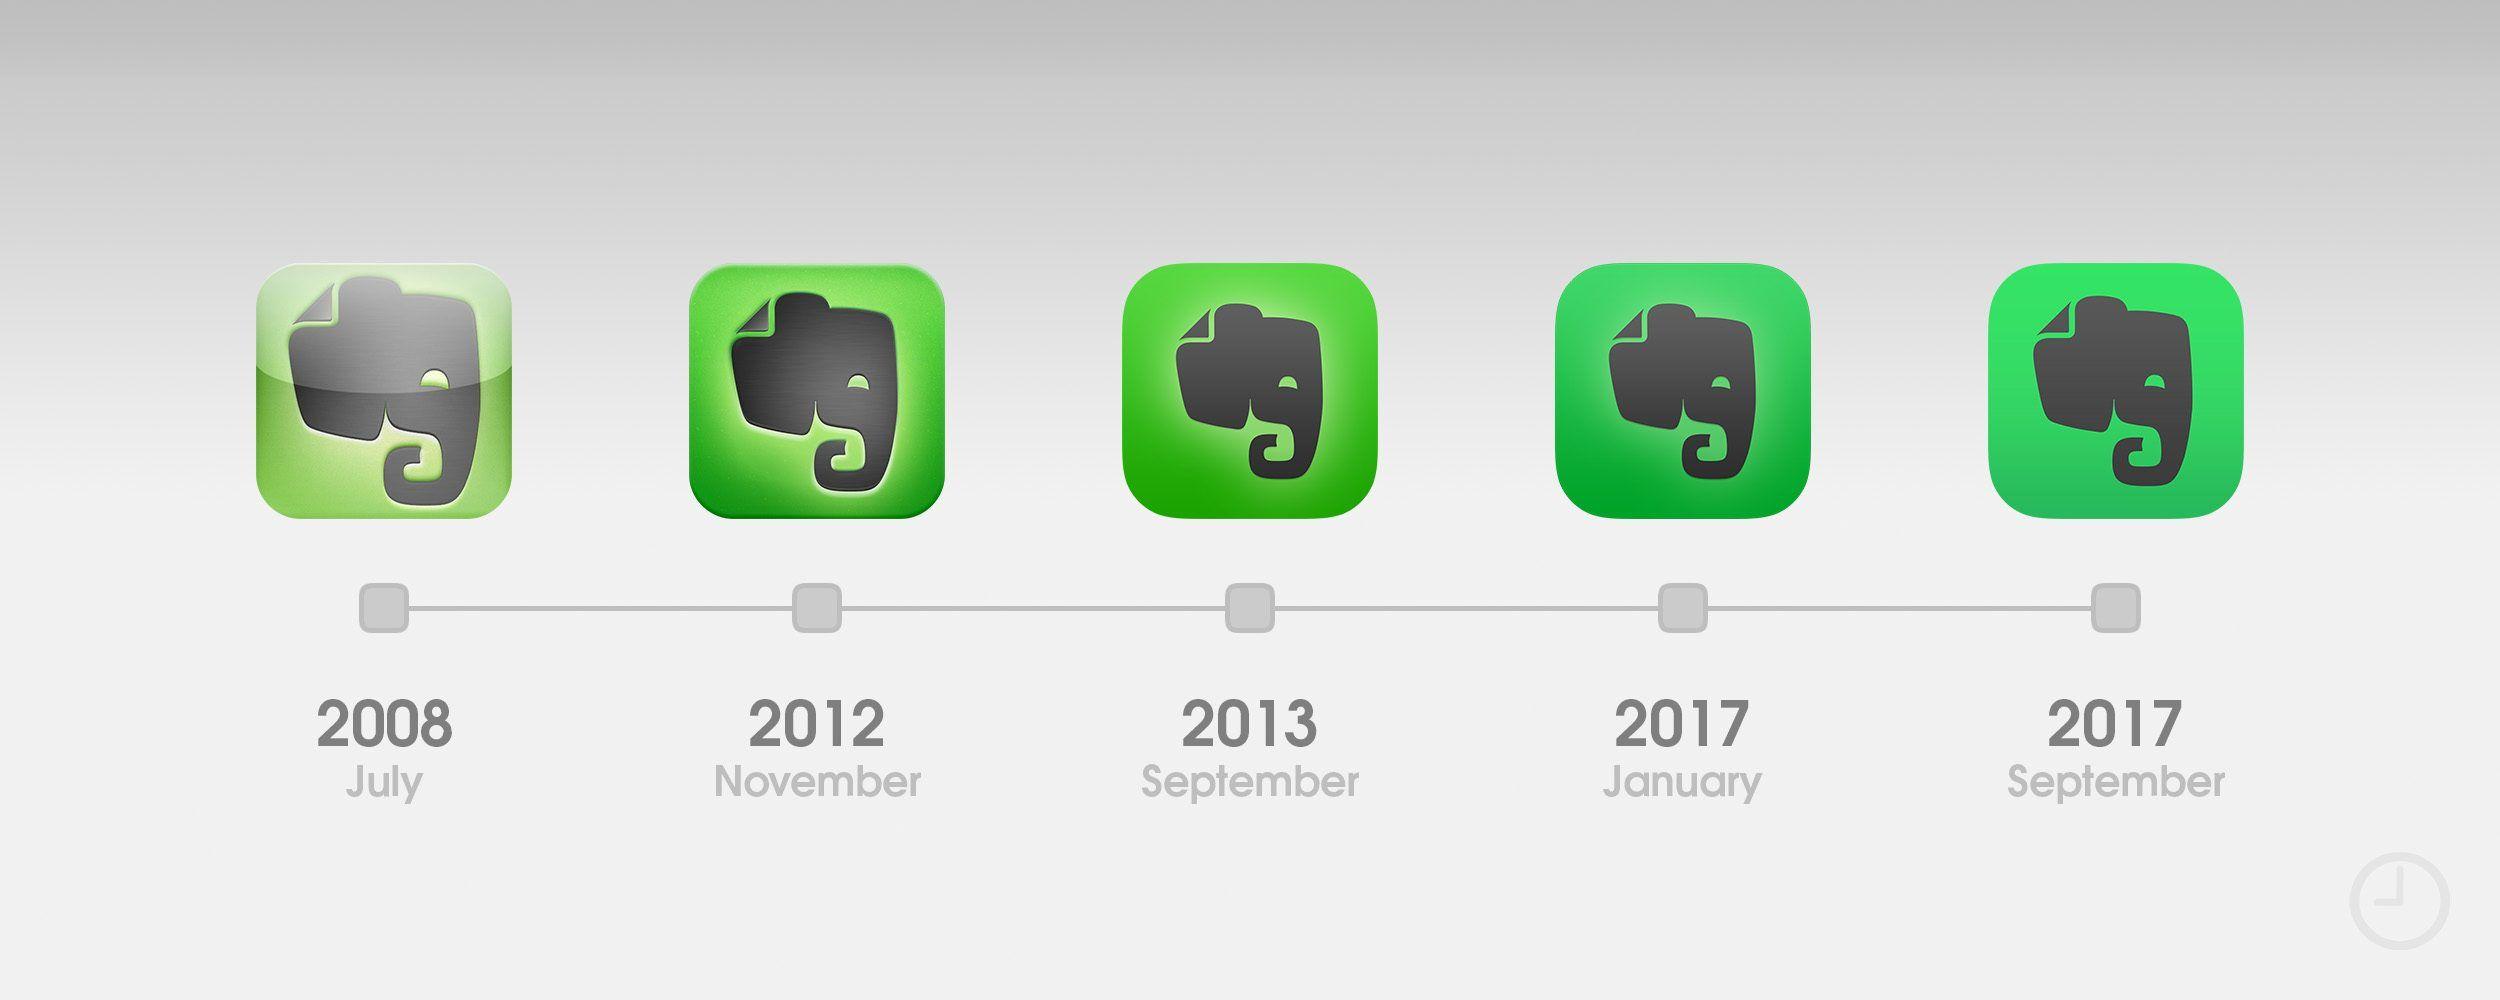 Green App Logo - 10 years of the App Store: The design evolution of the earliest apps ...